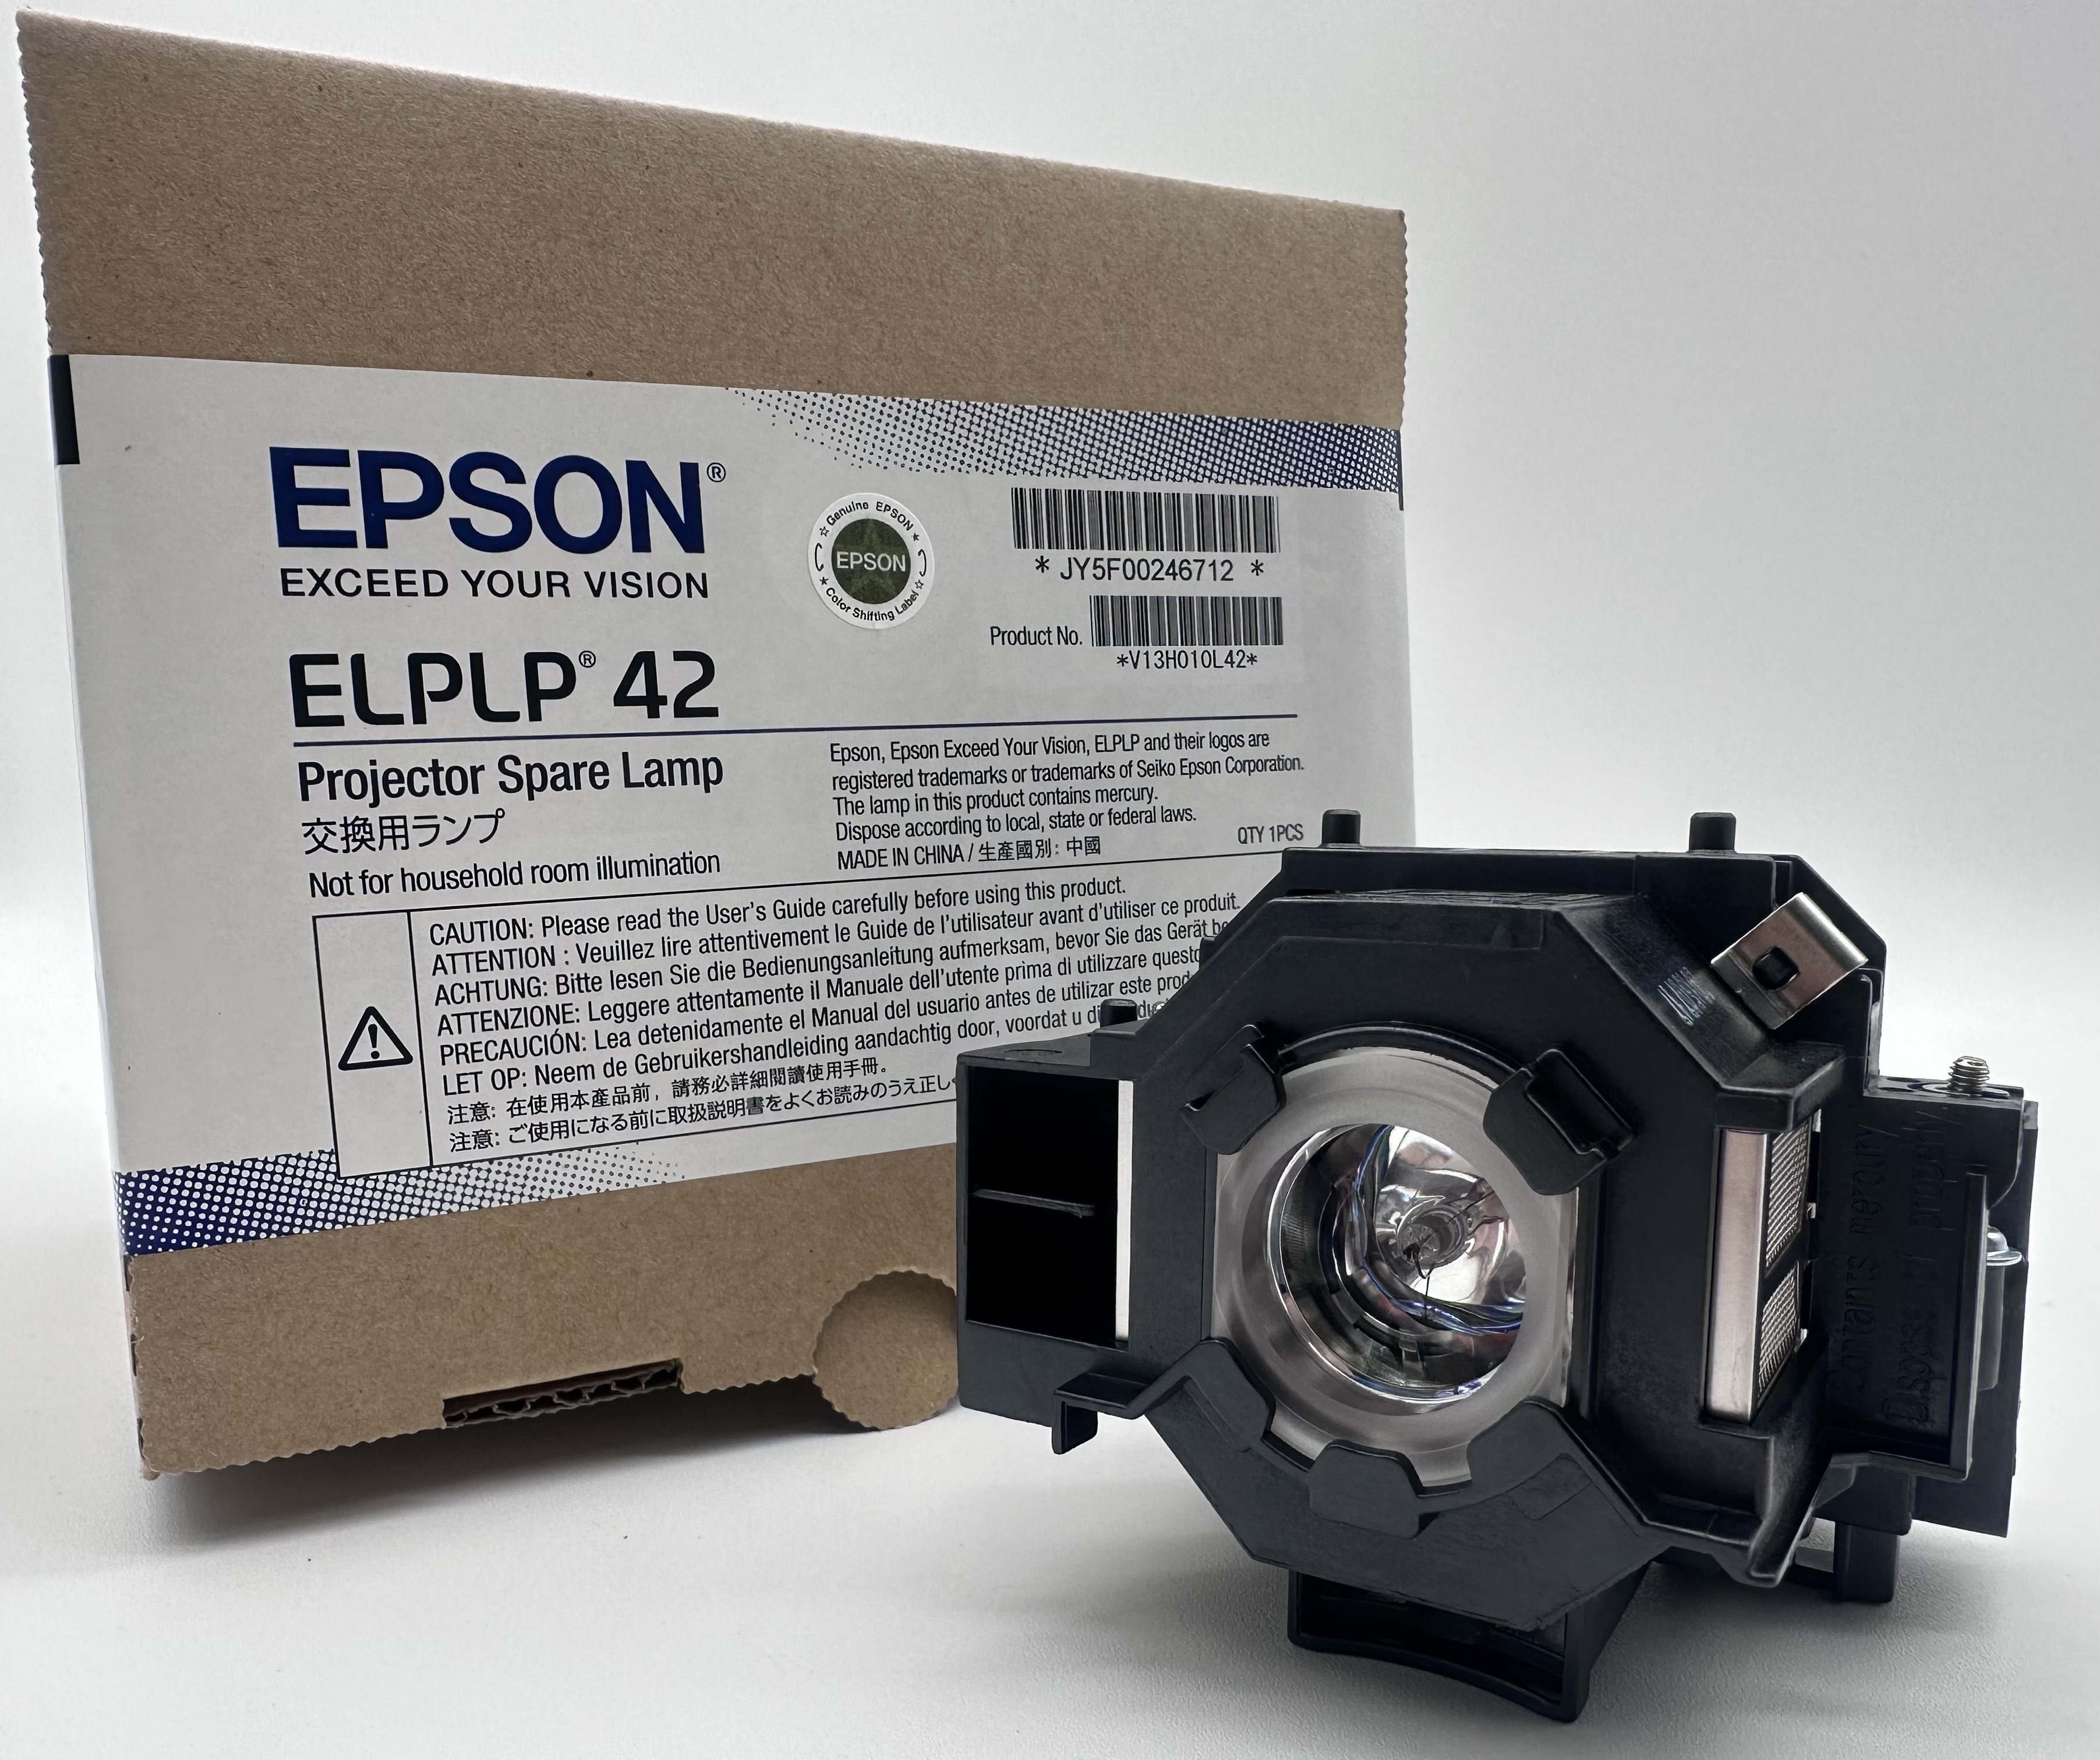 OEM Lamp & Housing for the Epson Powerlite 400W Projector - 1 Year Jaspertronics Full Support Warranty! - image 1 of 7